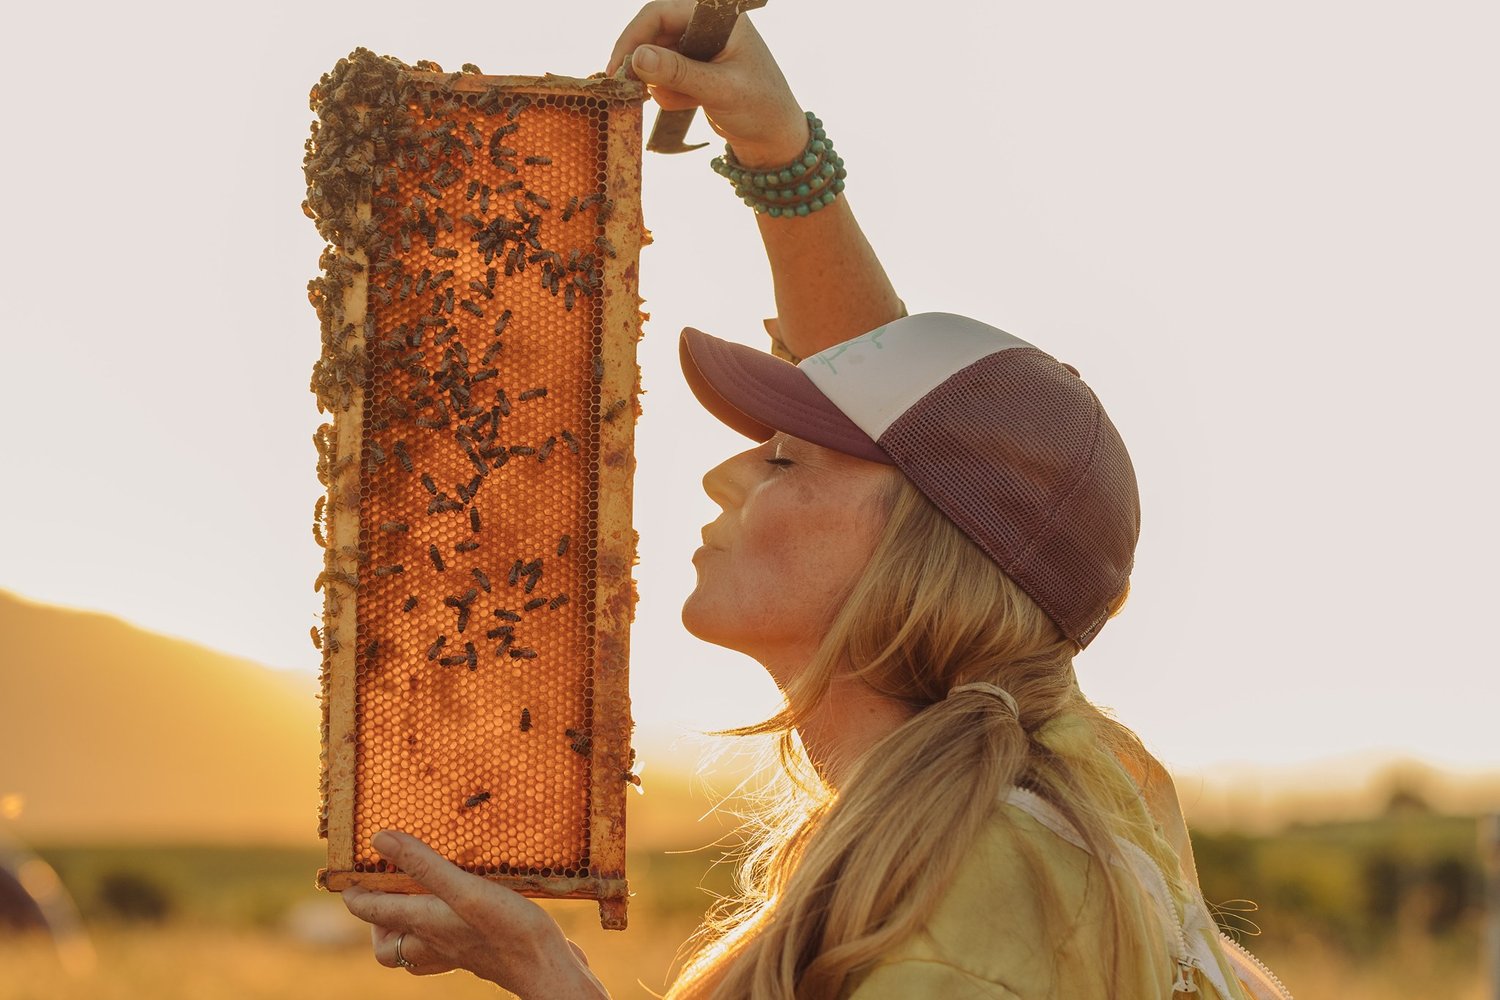 A Female bee keeper blows a kiss at a honeycomb full of bees